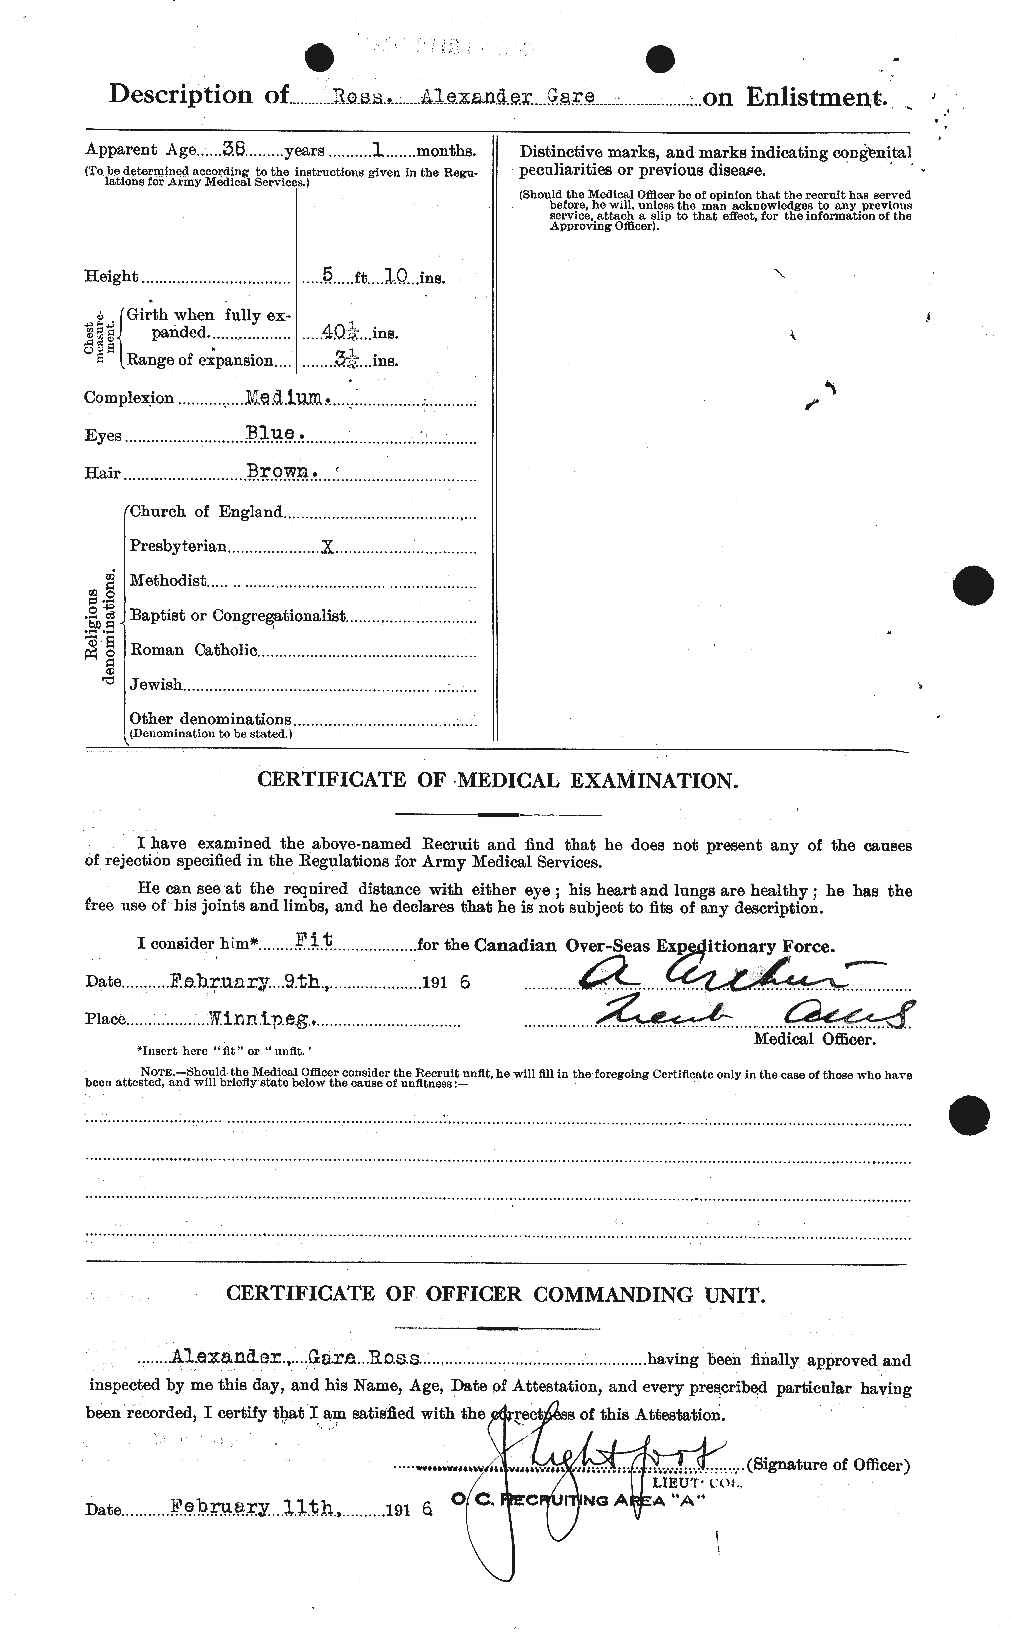 Personnel Records of the First World War - CEF 611400b